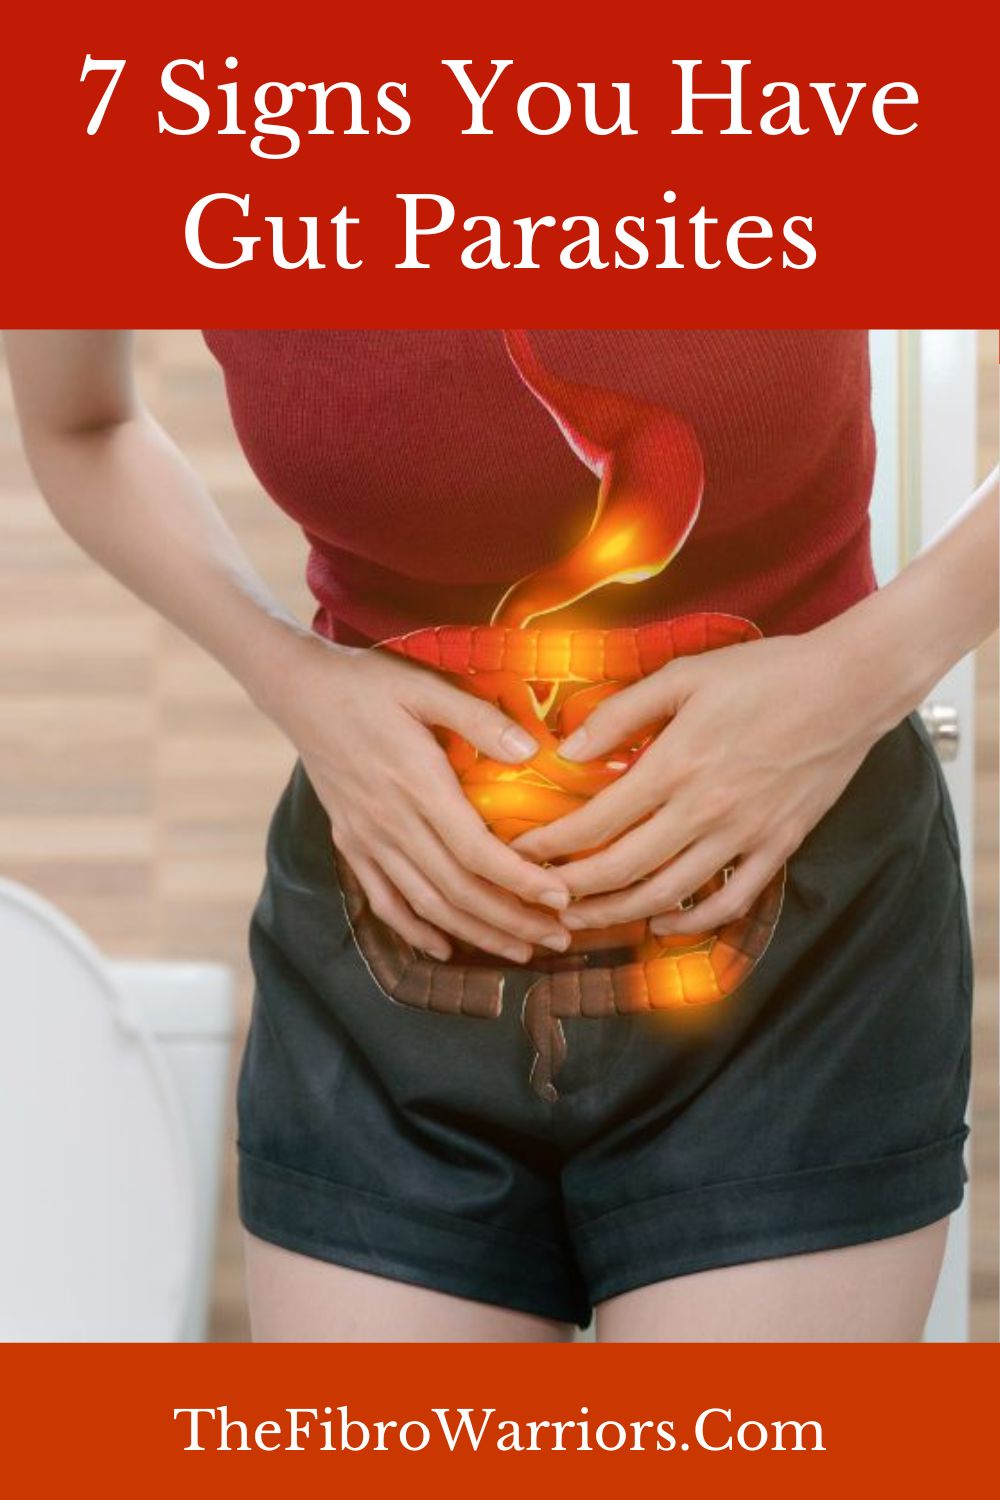 7 Signs You Have Gut Parasites